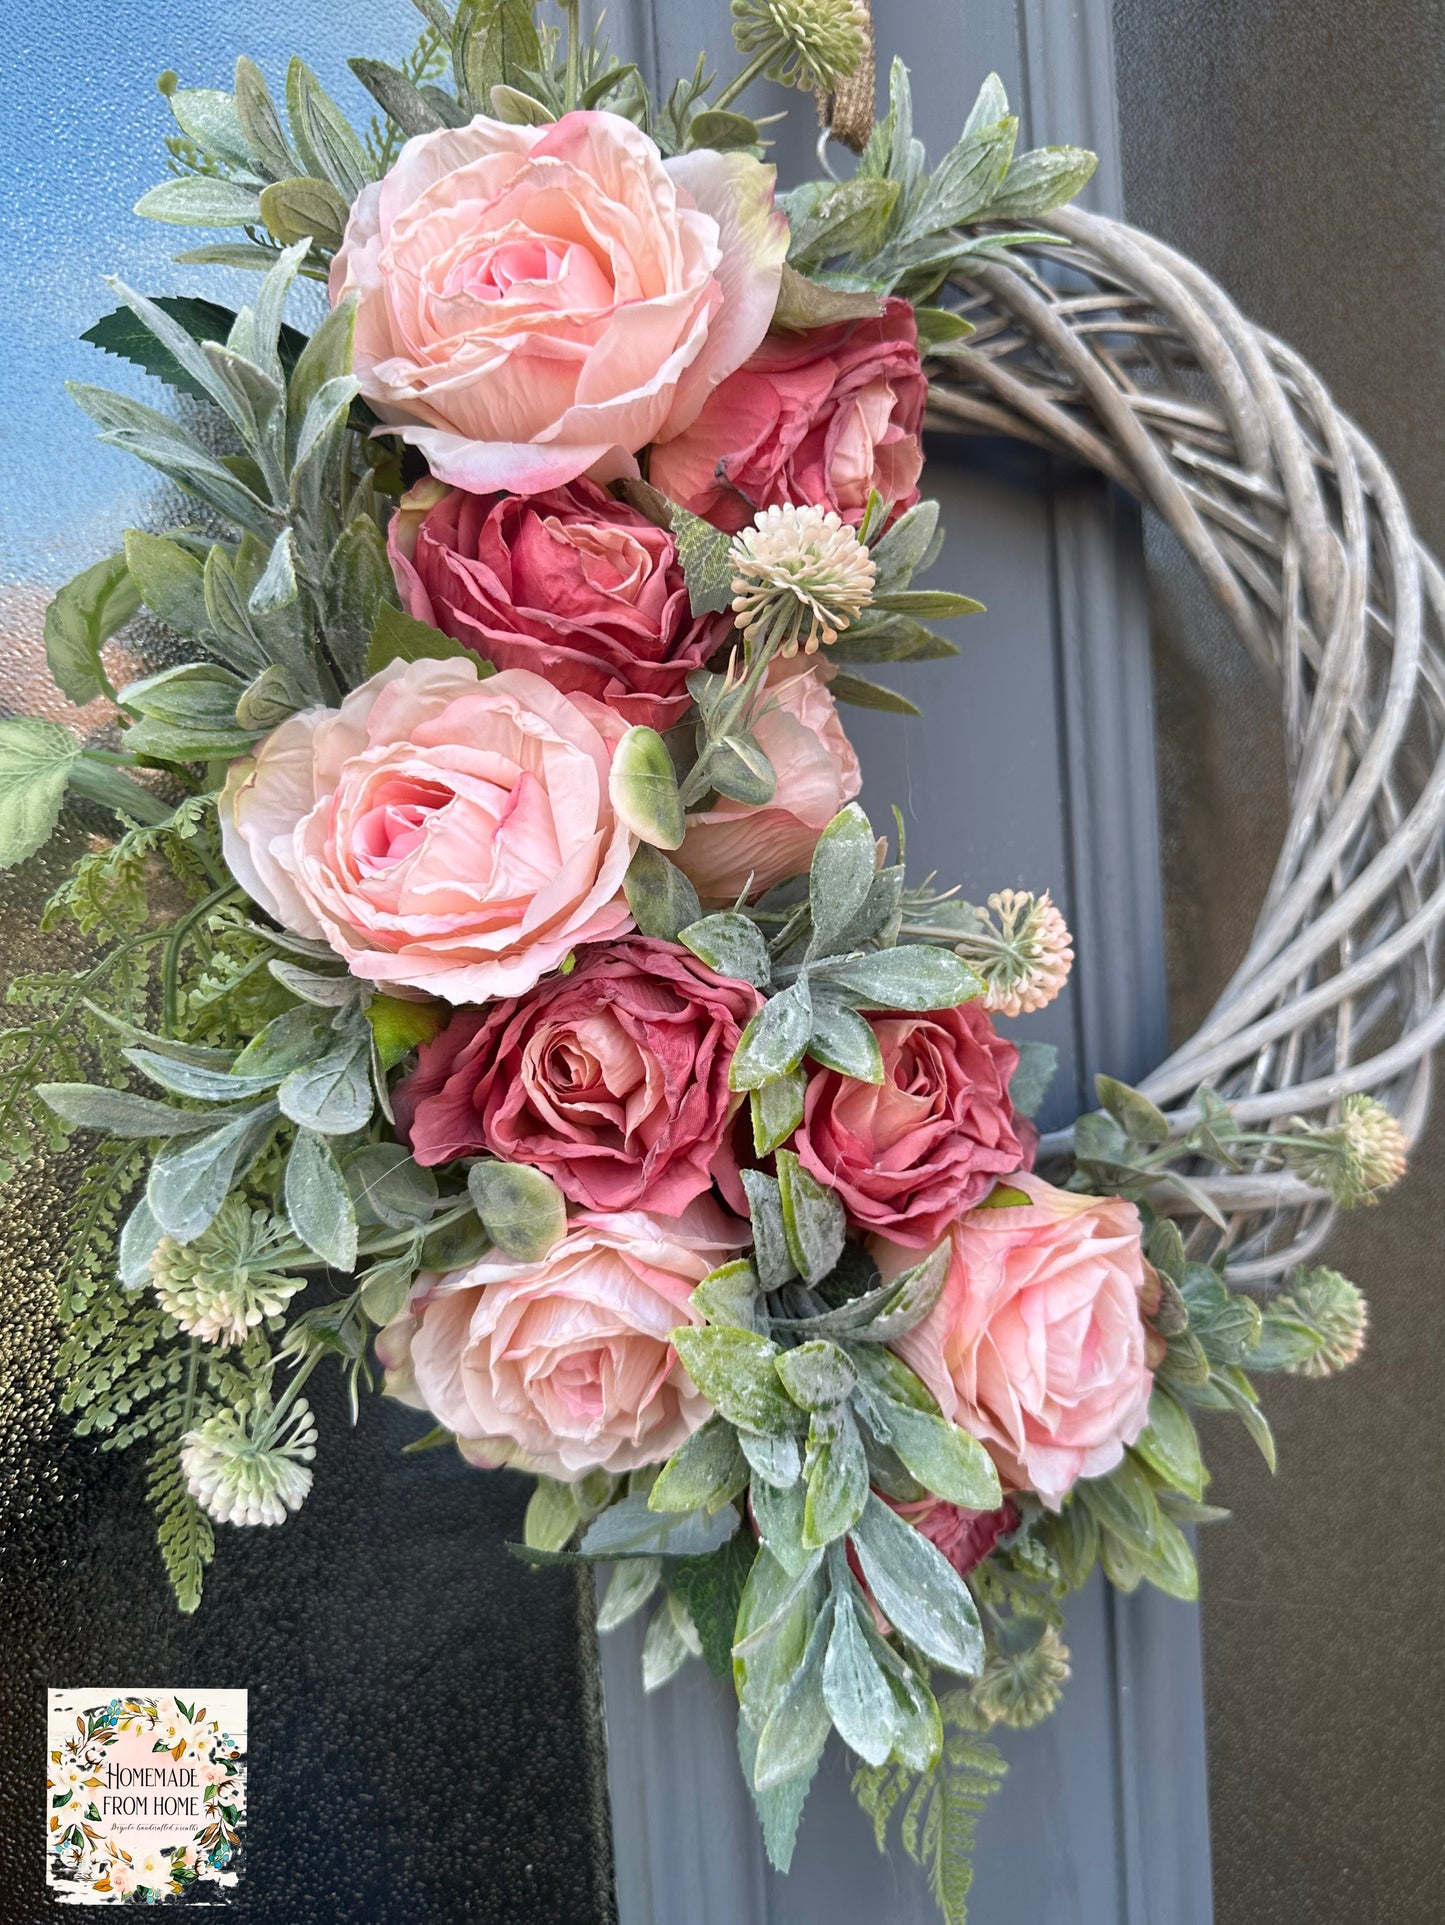 Vintage rose and ruscus wreath